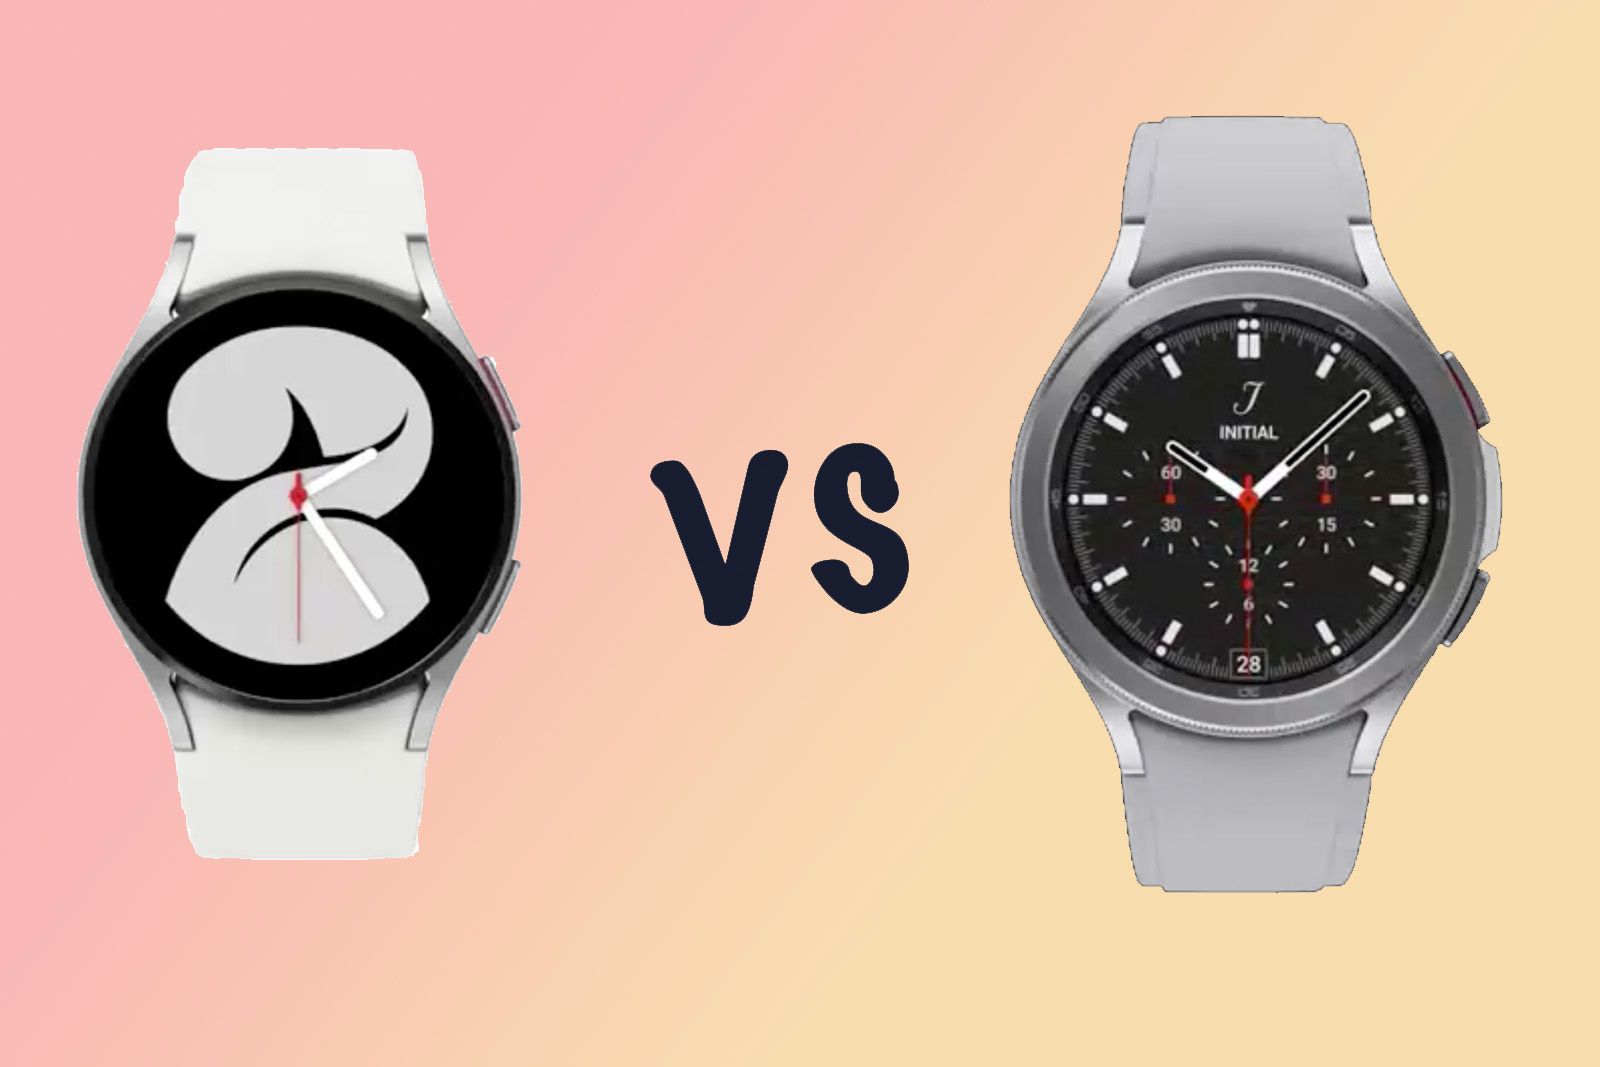 Samsung Galaxy Watch vs Classic: Differences compared